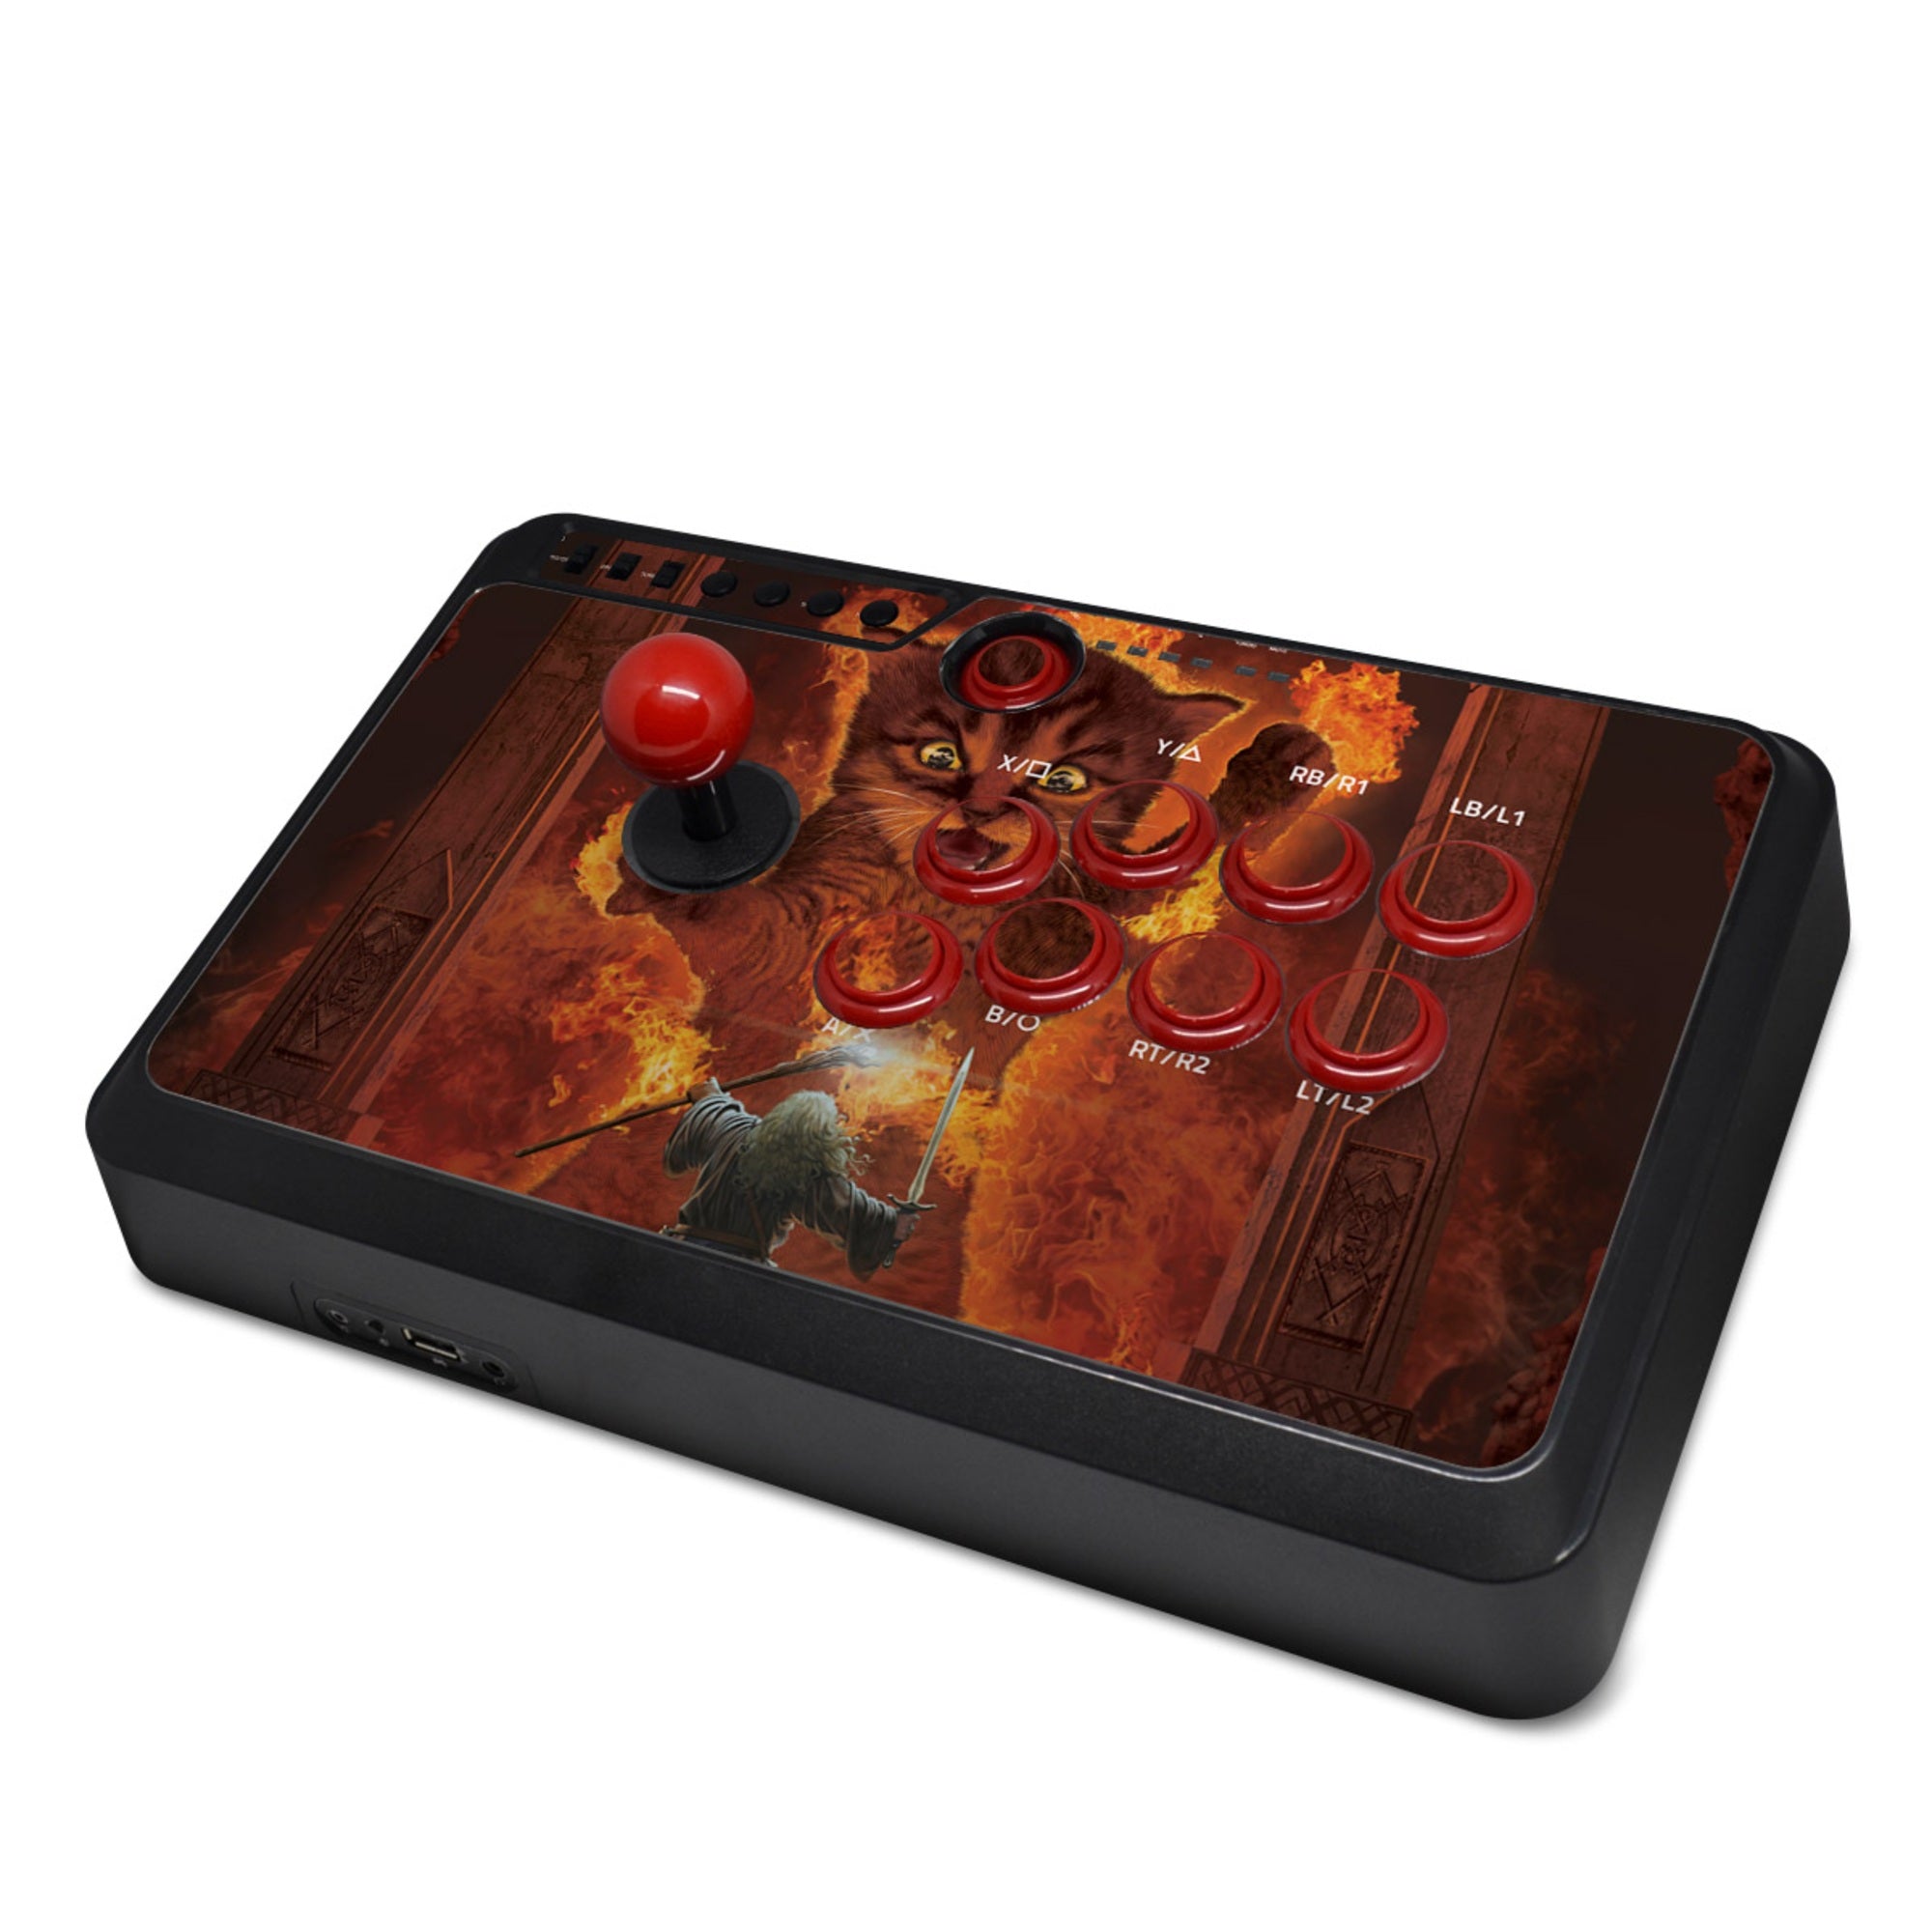 You Shall Not Pass - Mayflash F500 Arcade Fightstick Skin